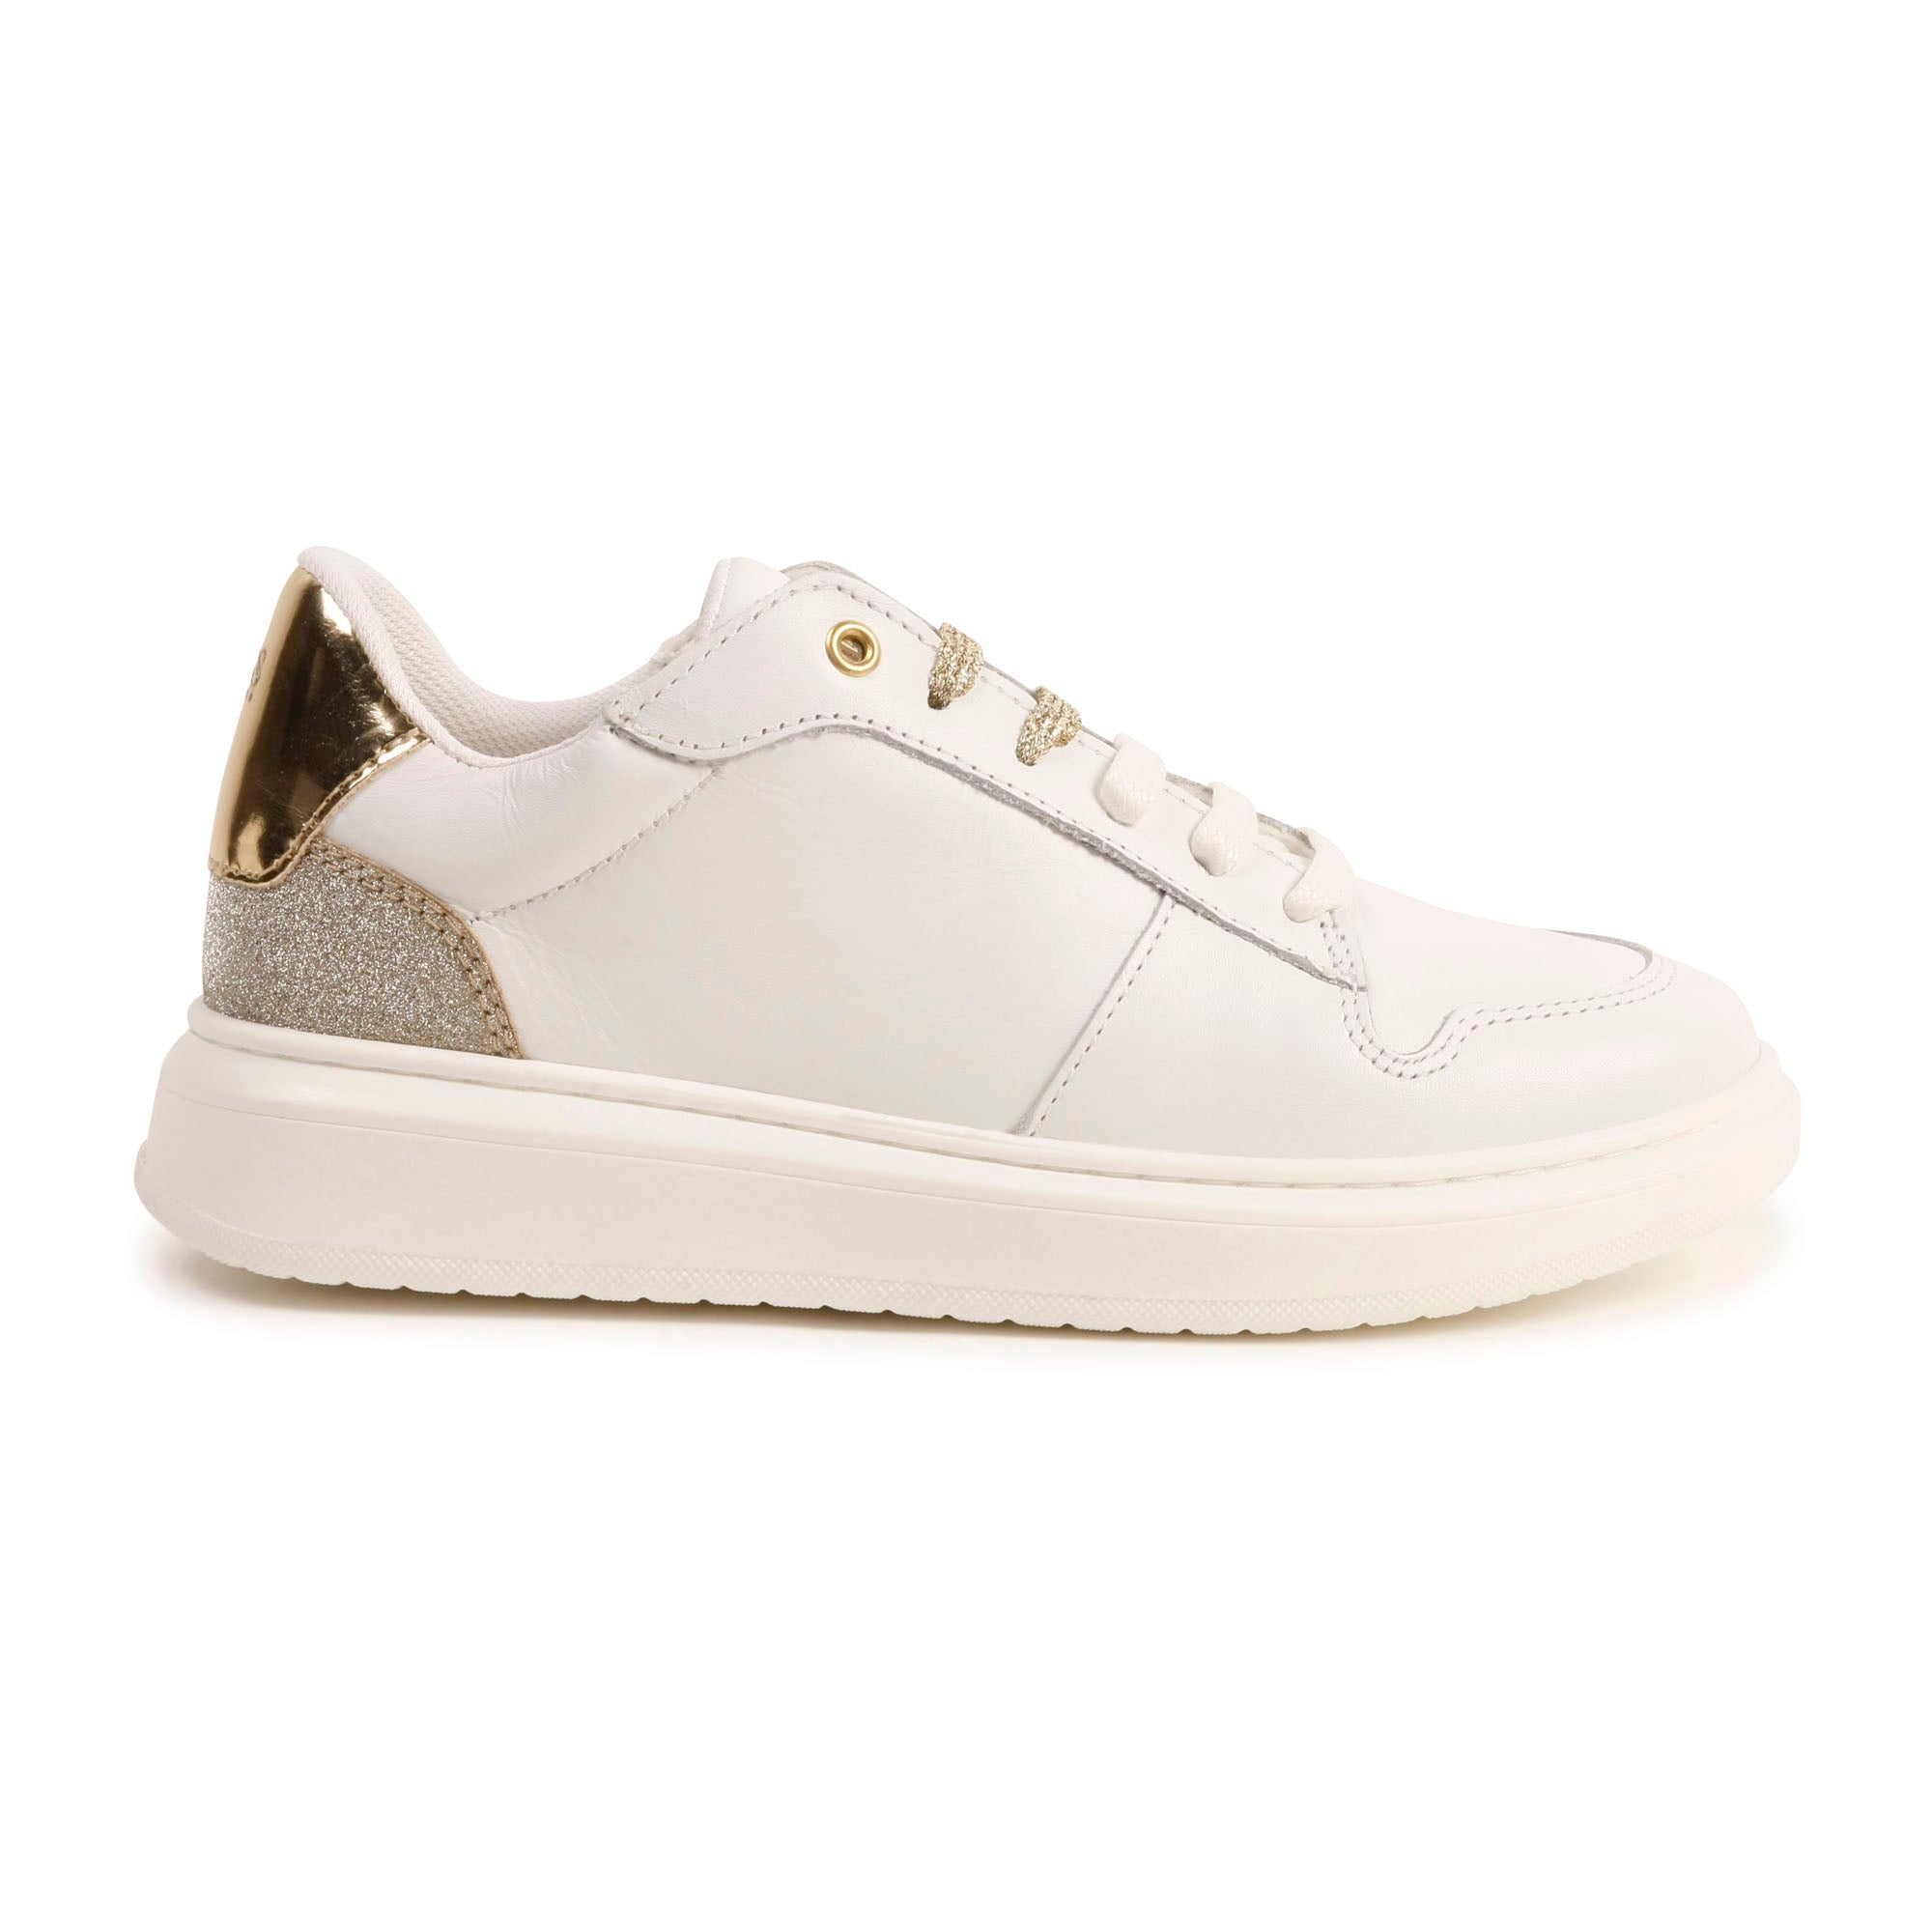 Hugo Boss Gold and White Lace-Up Sneaker - Tassel Children Shoes